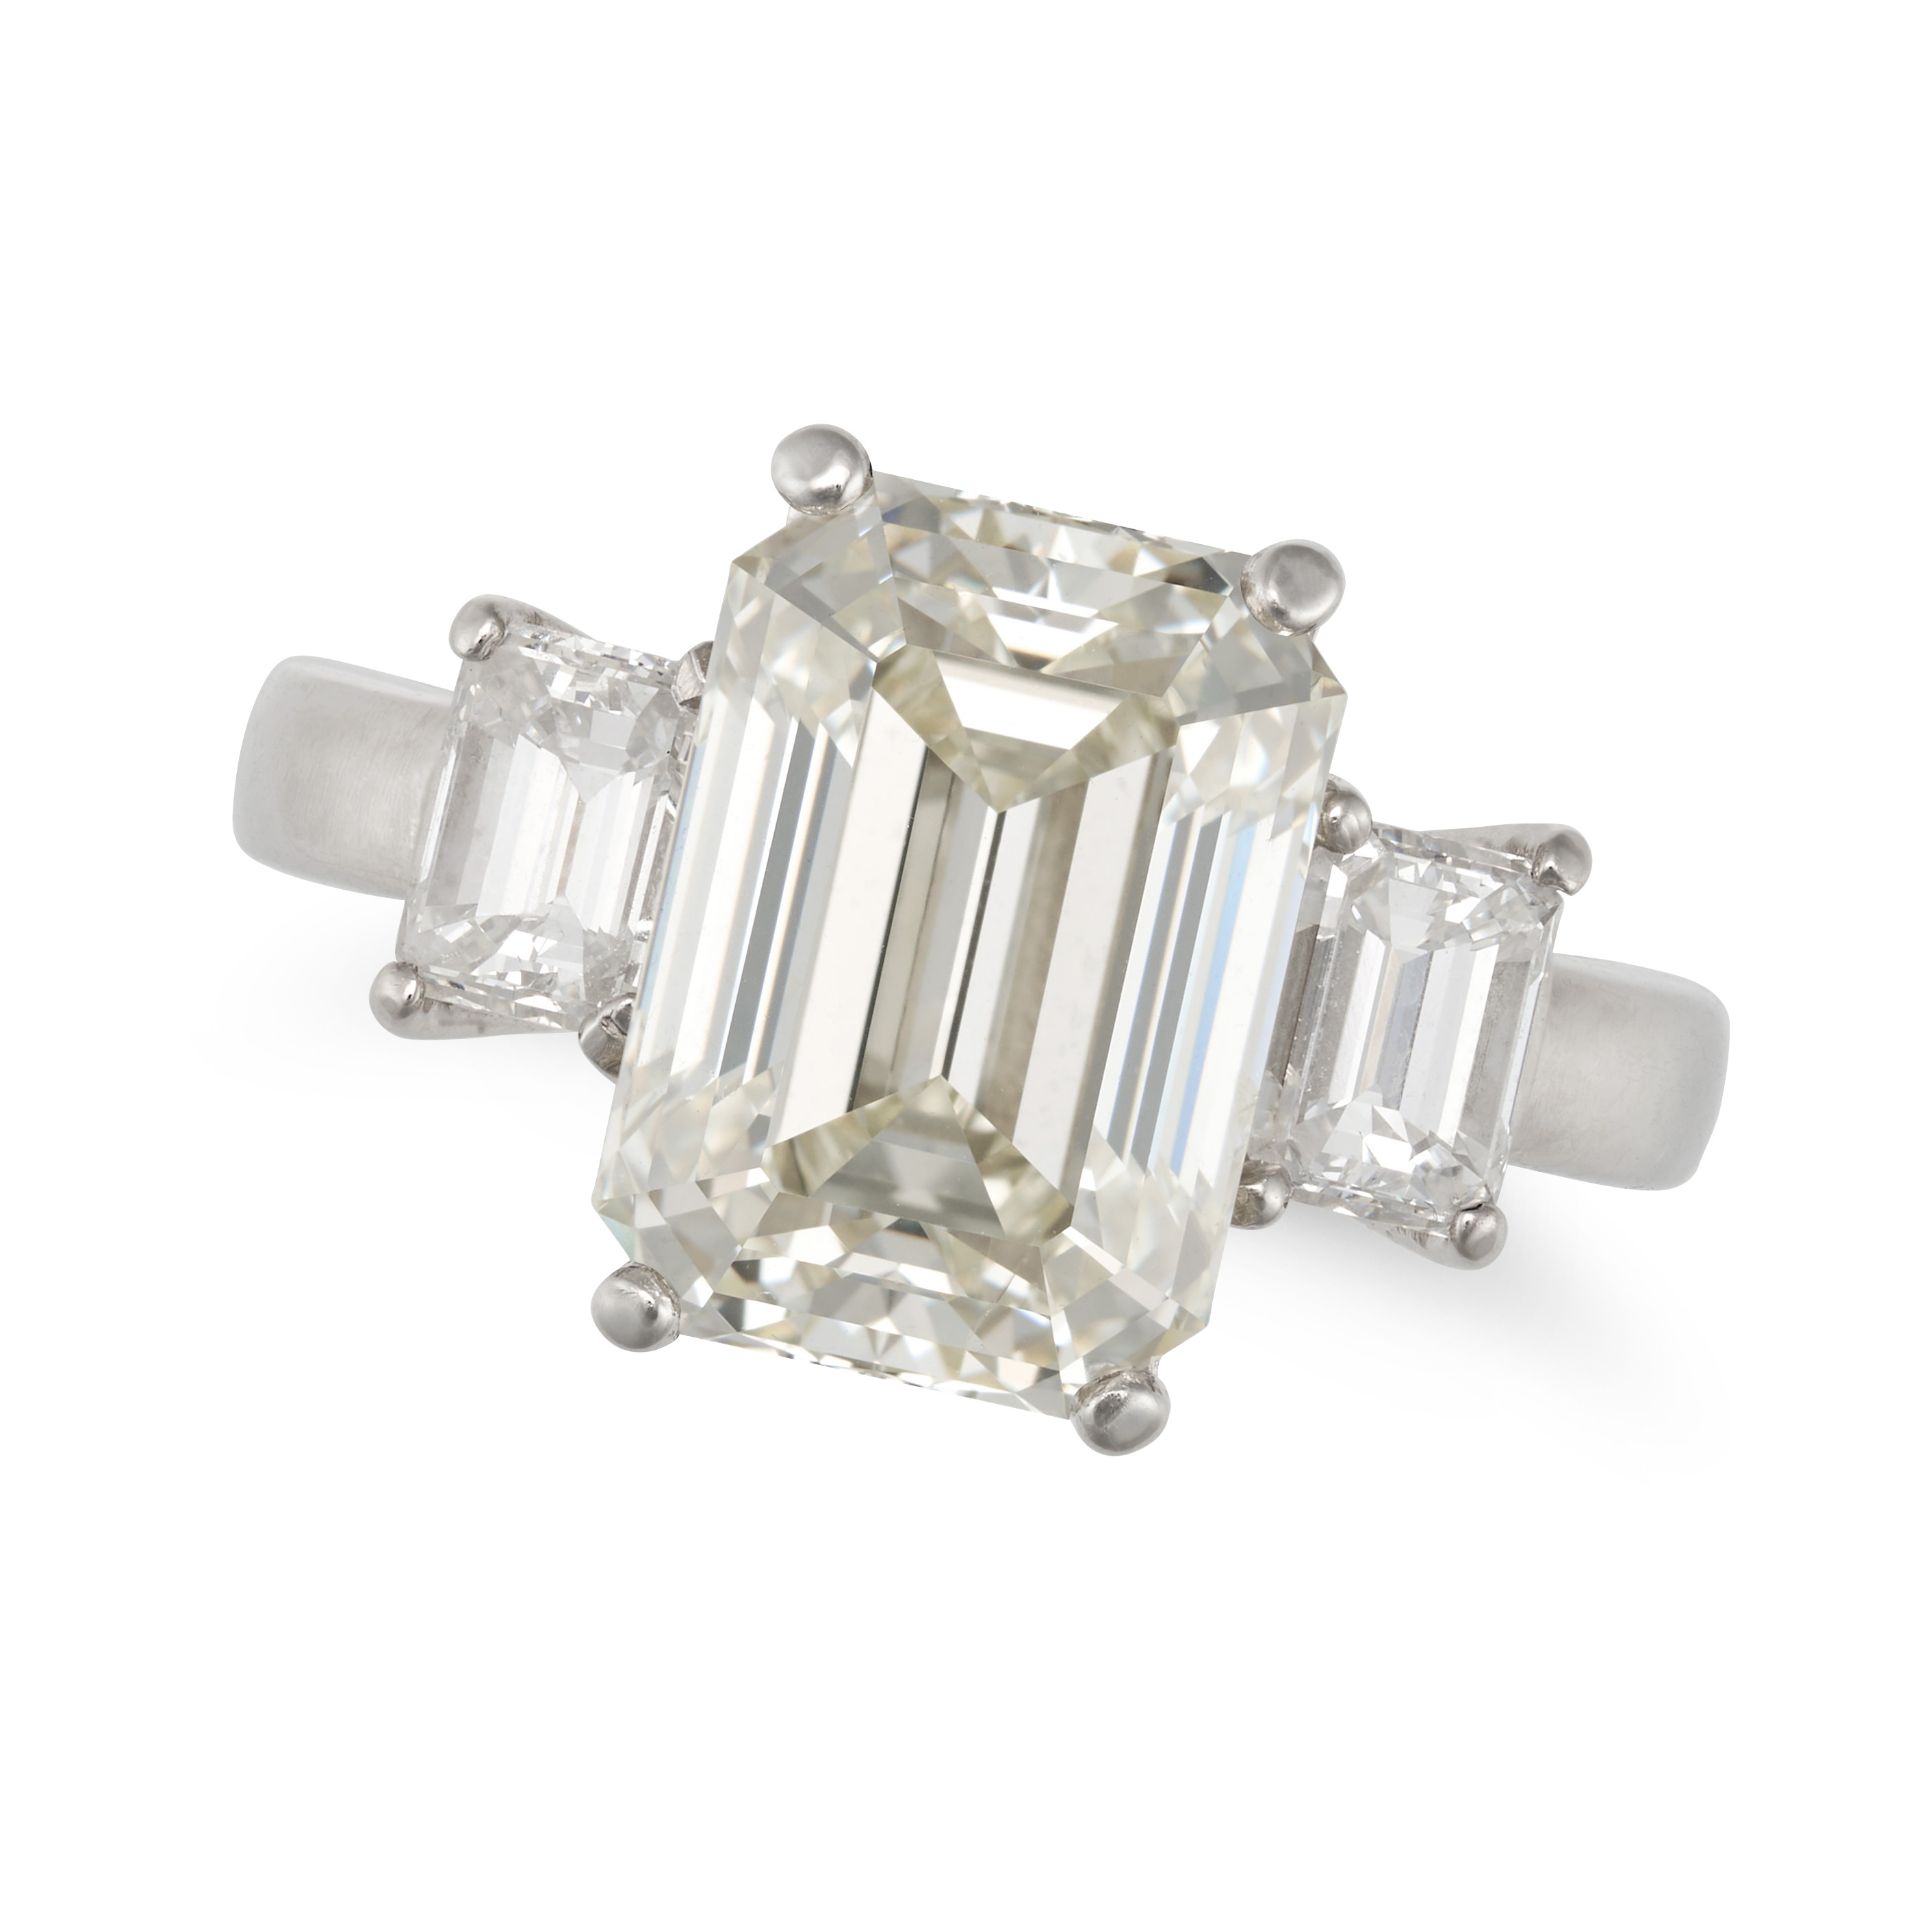 A DIAMOND THREE STONE RING in platinum, set with an emerald cut diamond of 5.33 carats between tw...